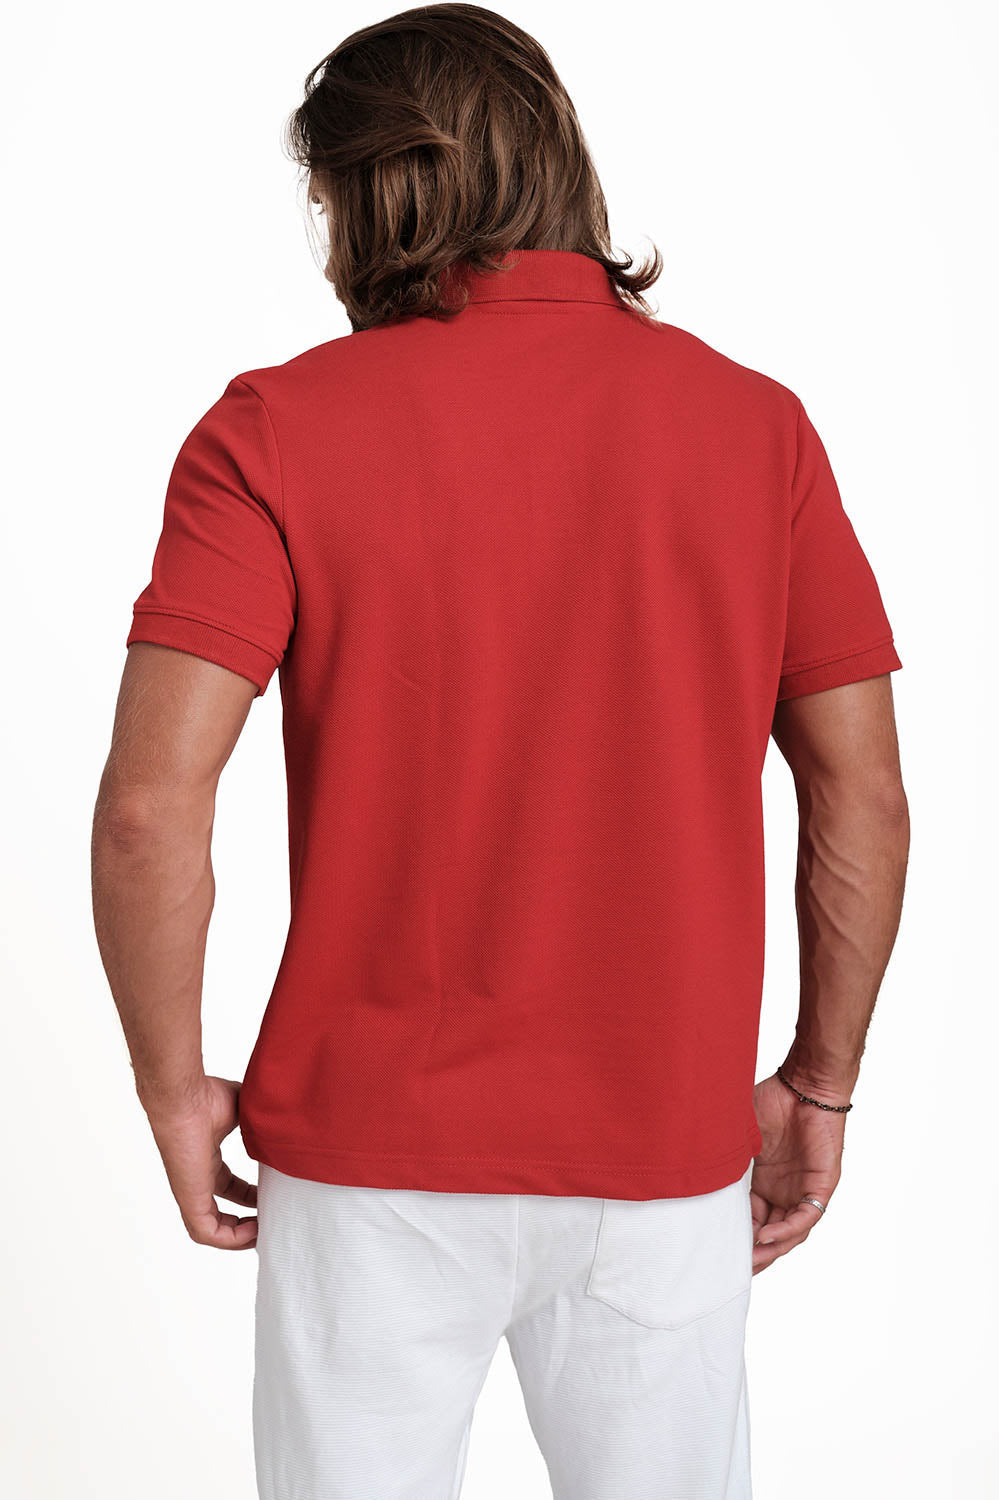 Polo RED T-shirts with Front Embroidery, Solid pique fabric